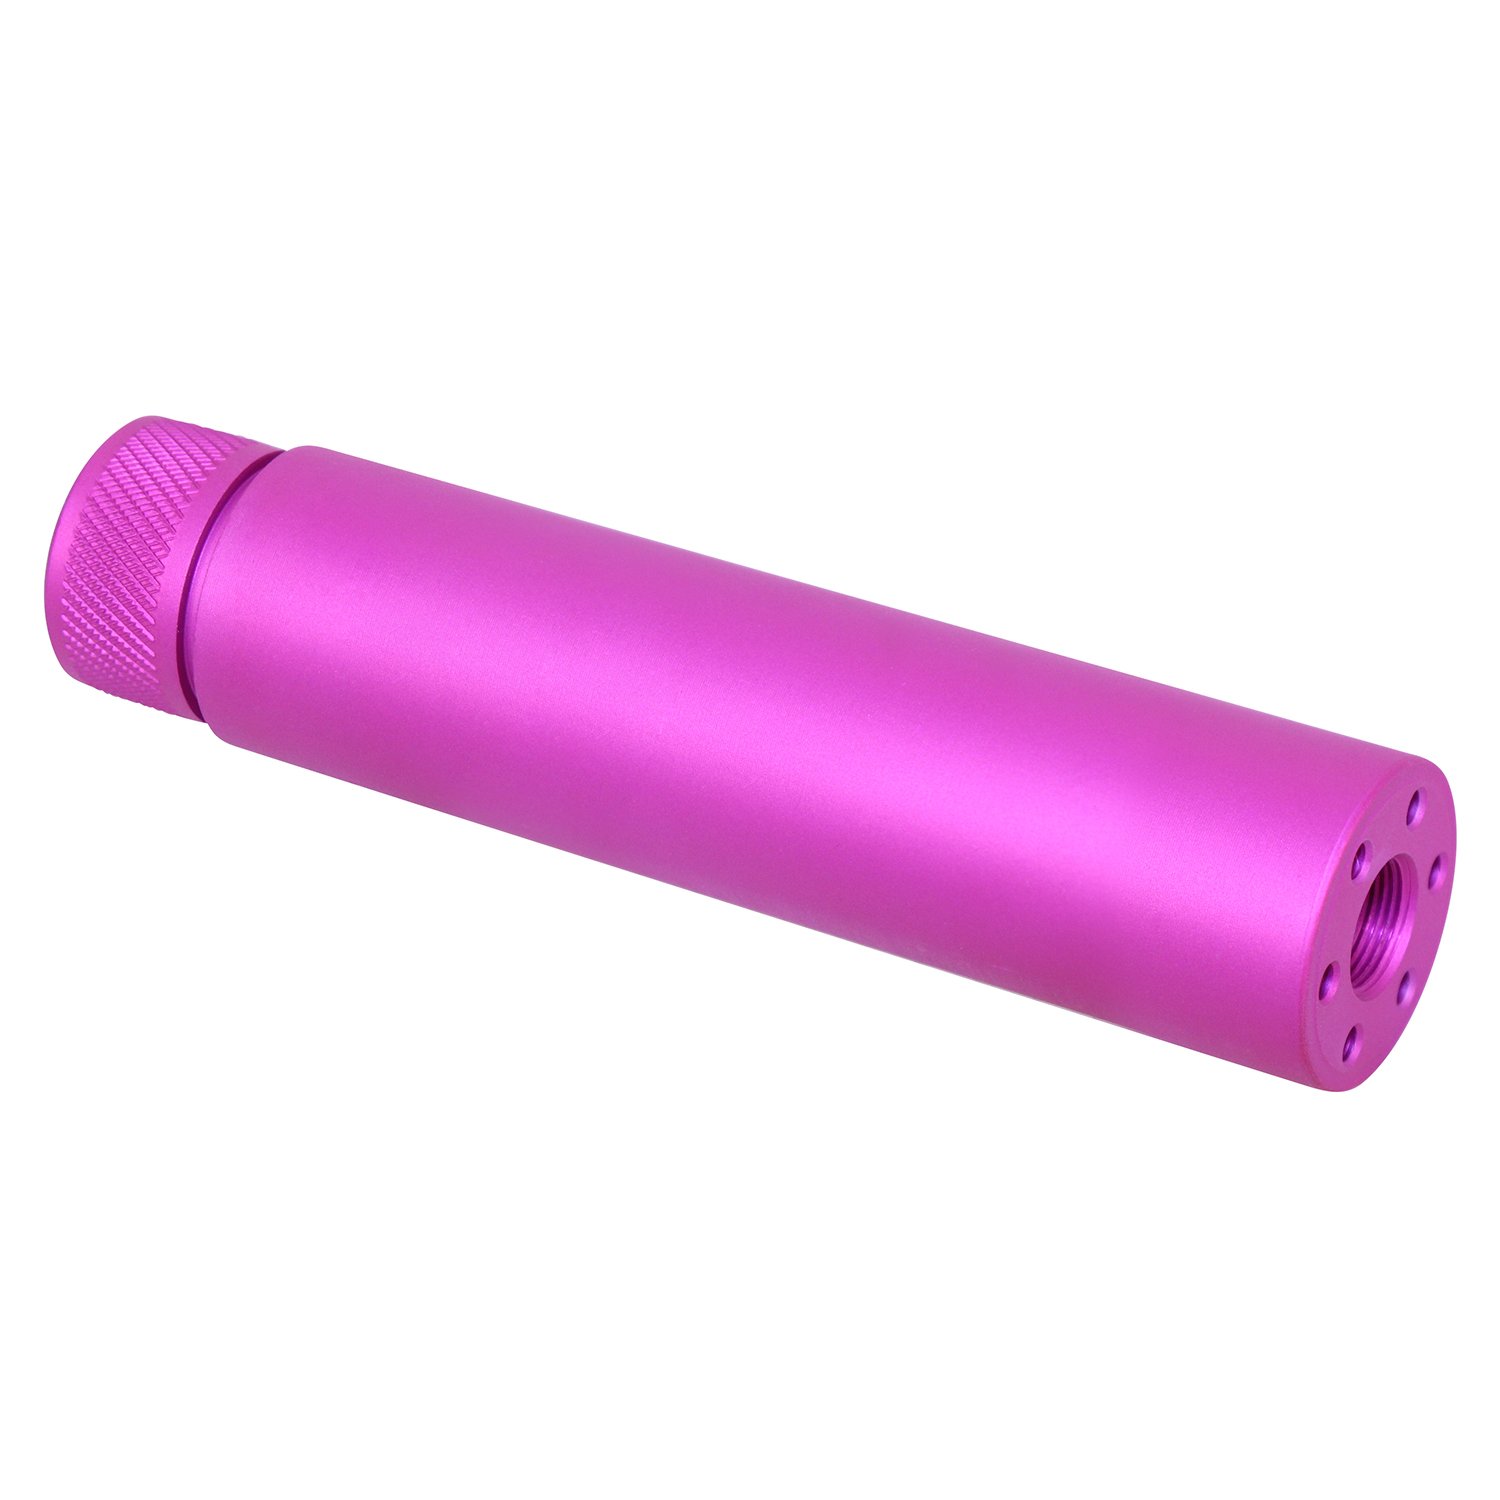 AR-15 Slip Over Fake Suppressor in Anodized Pink